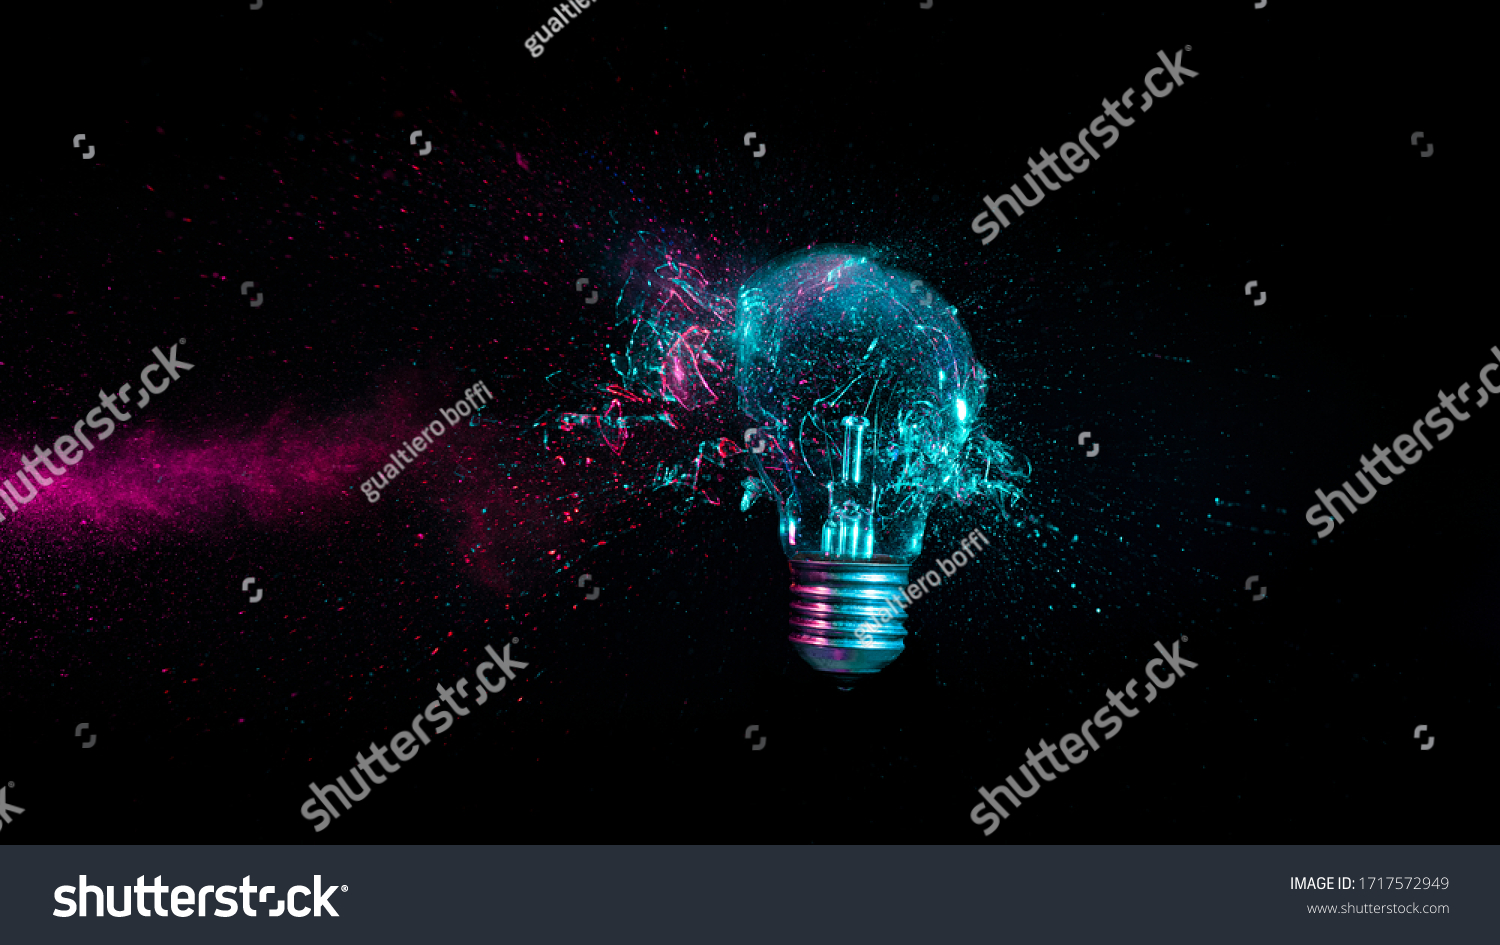 explosion of a traditional electric bulb. shot taken in high speed, at the exact moment of impact. concept of creativity and fragility. #1717572949